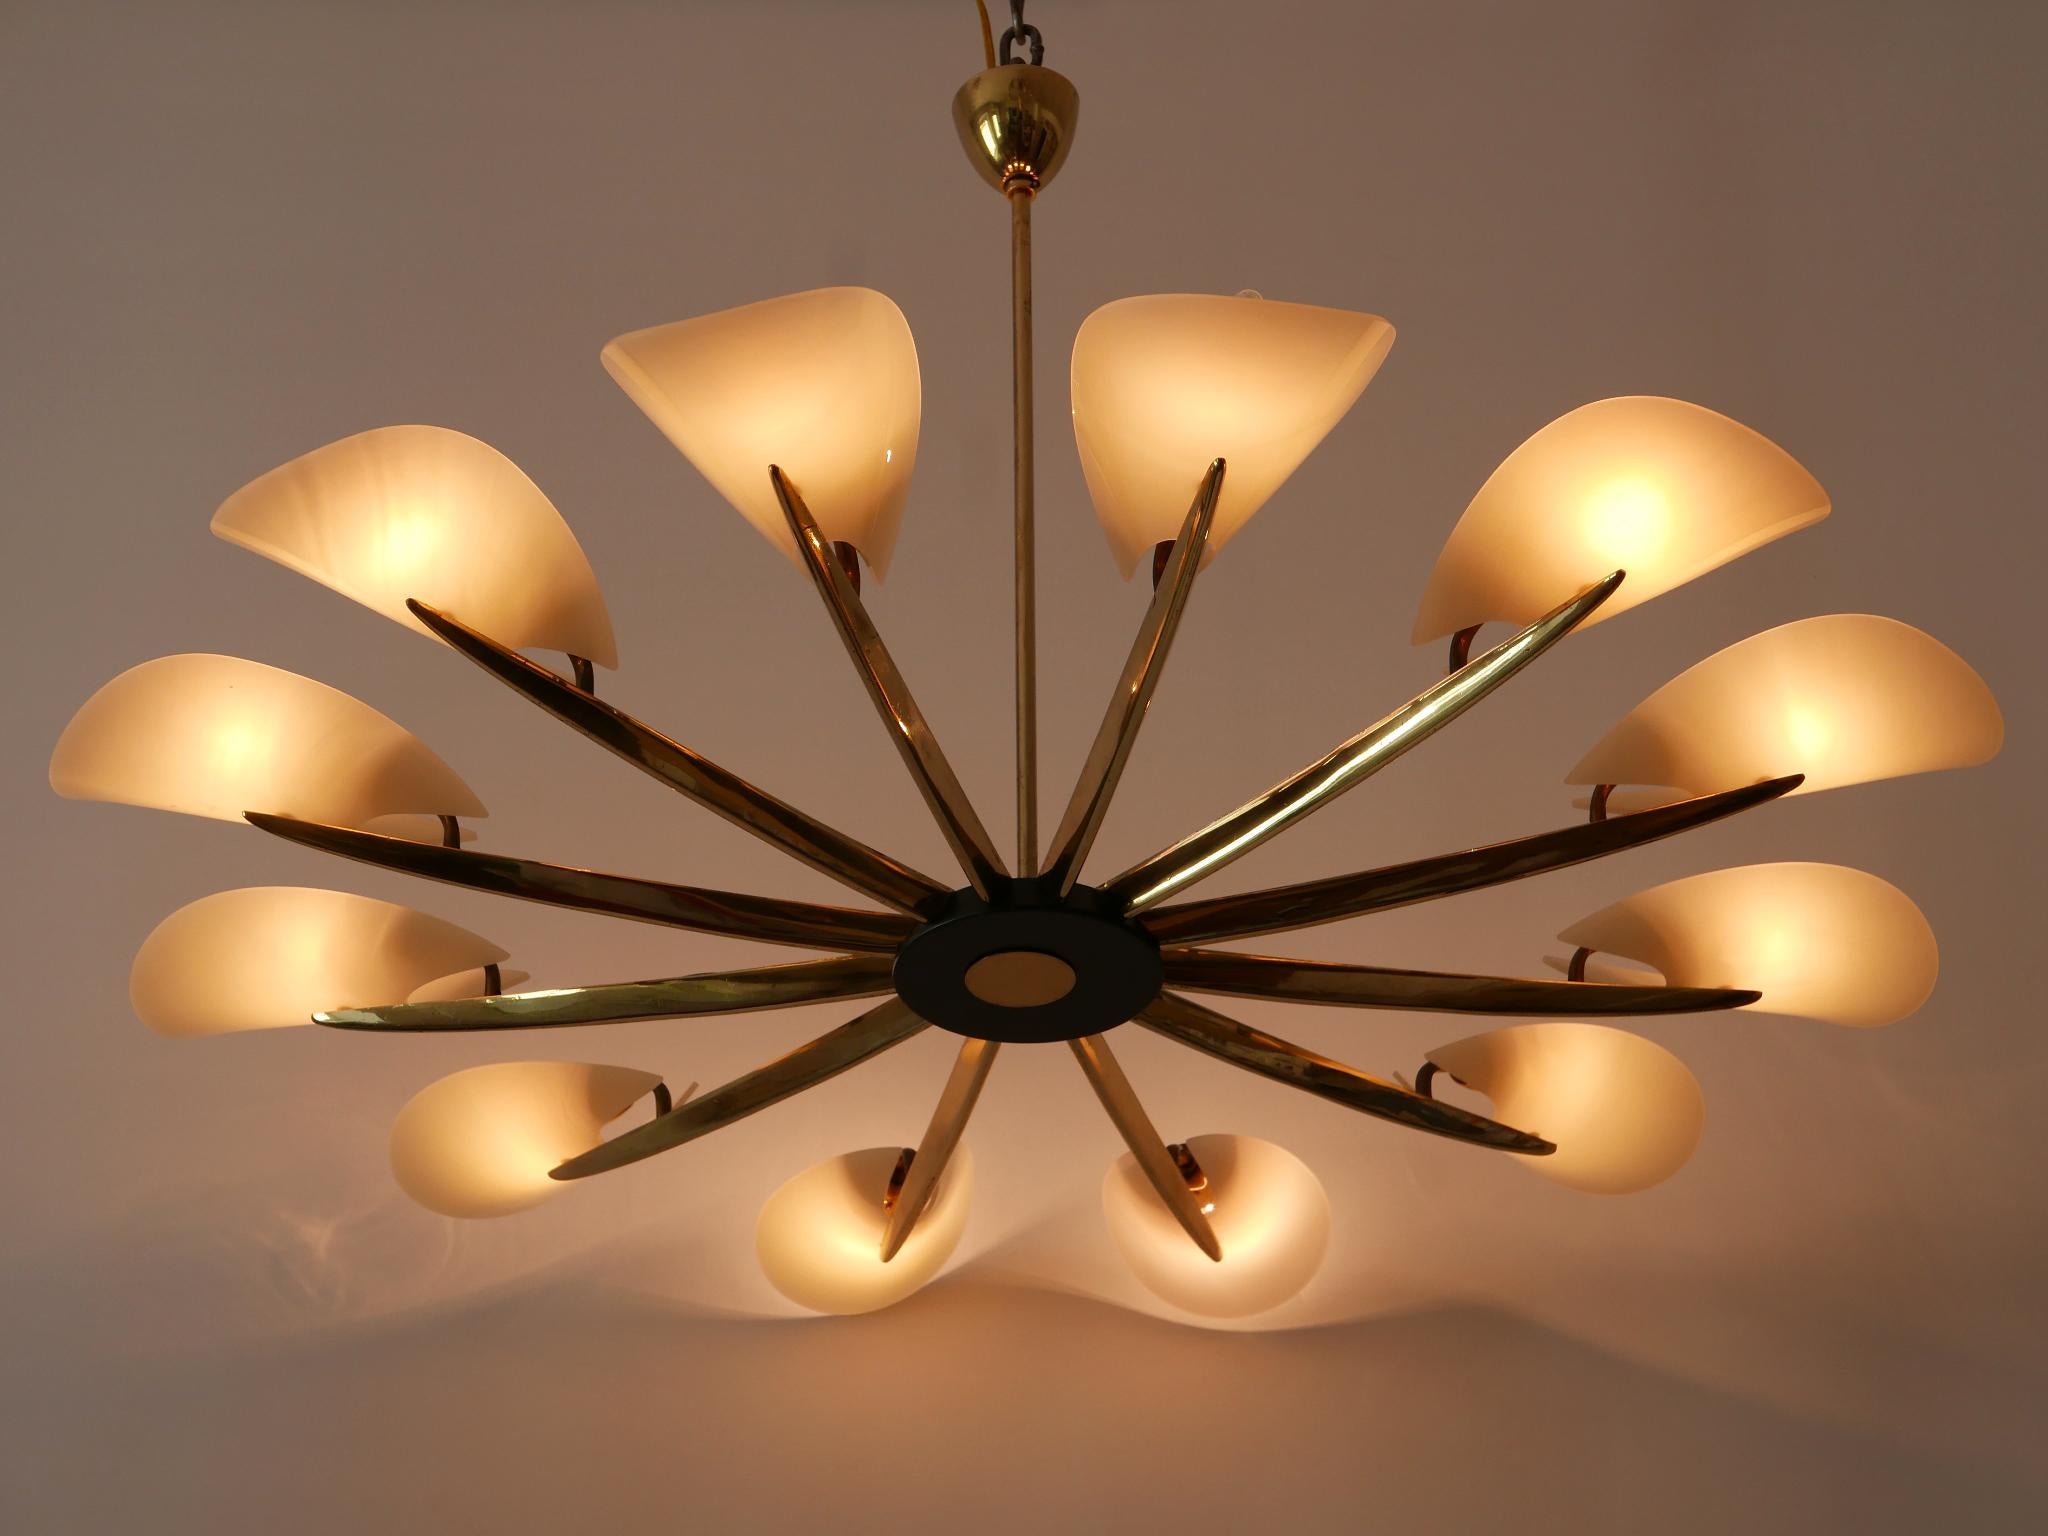 Exceptional, large 12-armed Mid-Century Modern Sputnik chandelier or pendant lamp. Designed and manufactured in Germany, 1950s.

Executed in brass and Lucite, the chandelier / pendant lamp needs 12 x E14 / E12 screw fit bulbs. It works both with 110